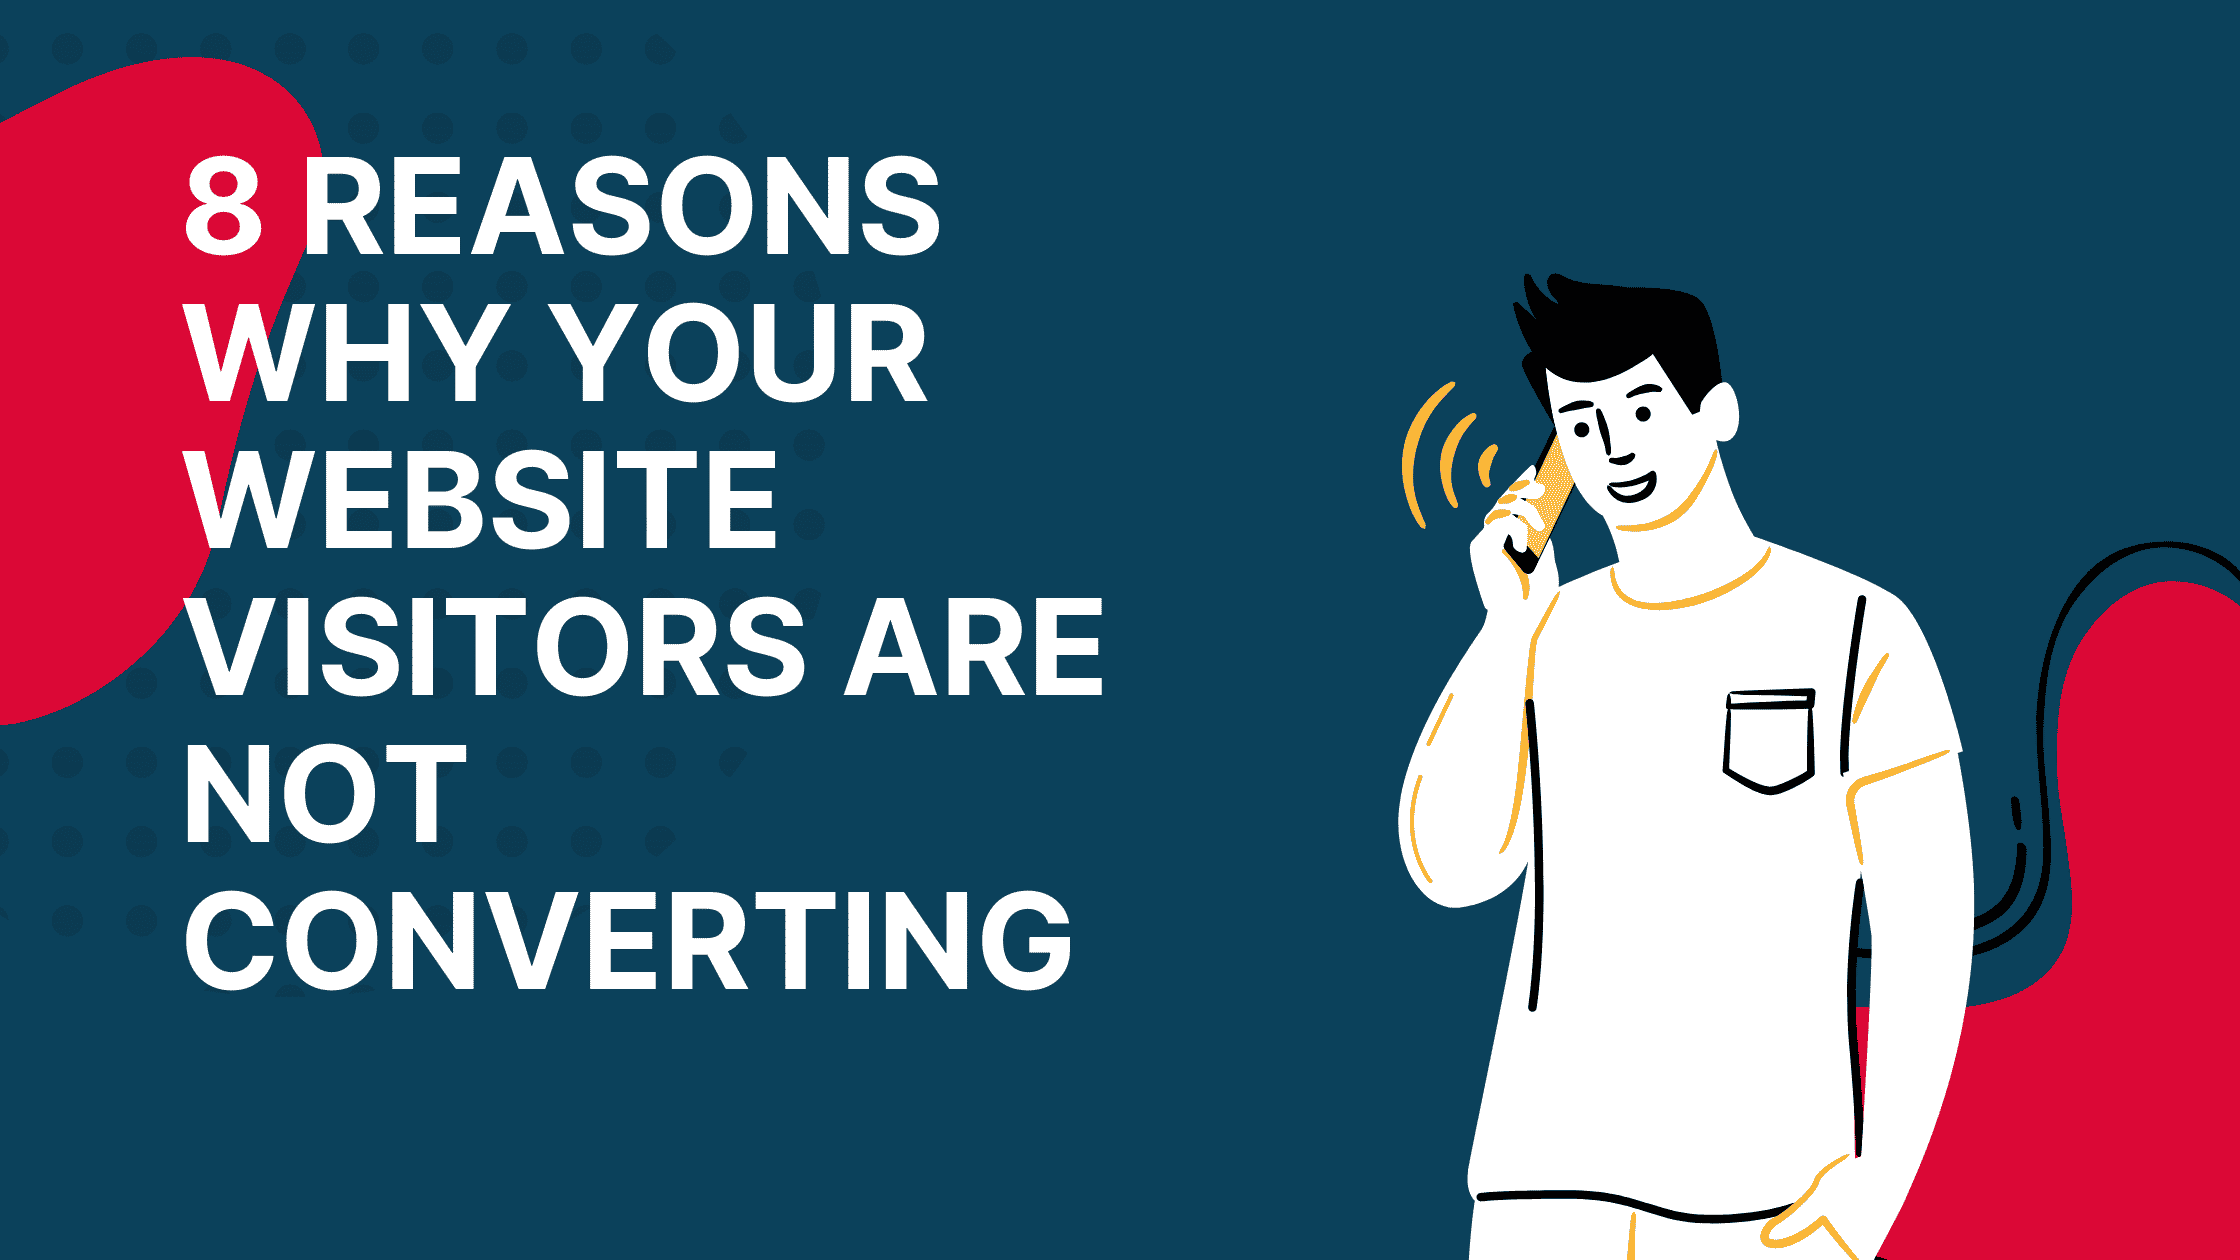 Reasons Why Your Website Visitors Are Not Converting